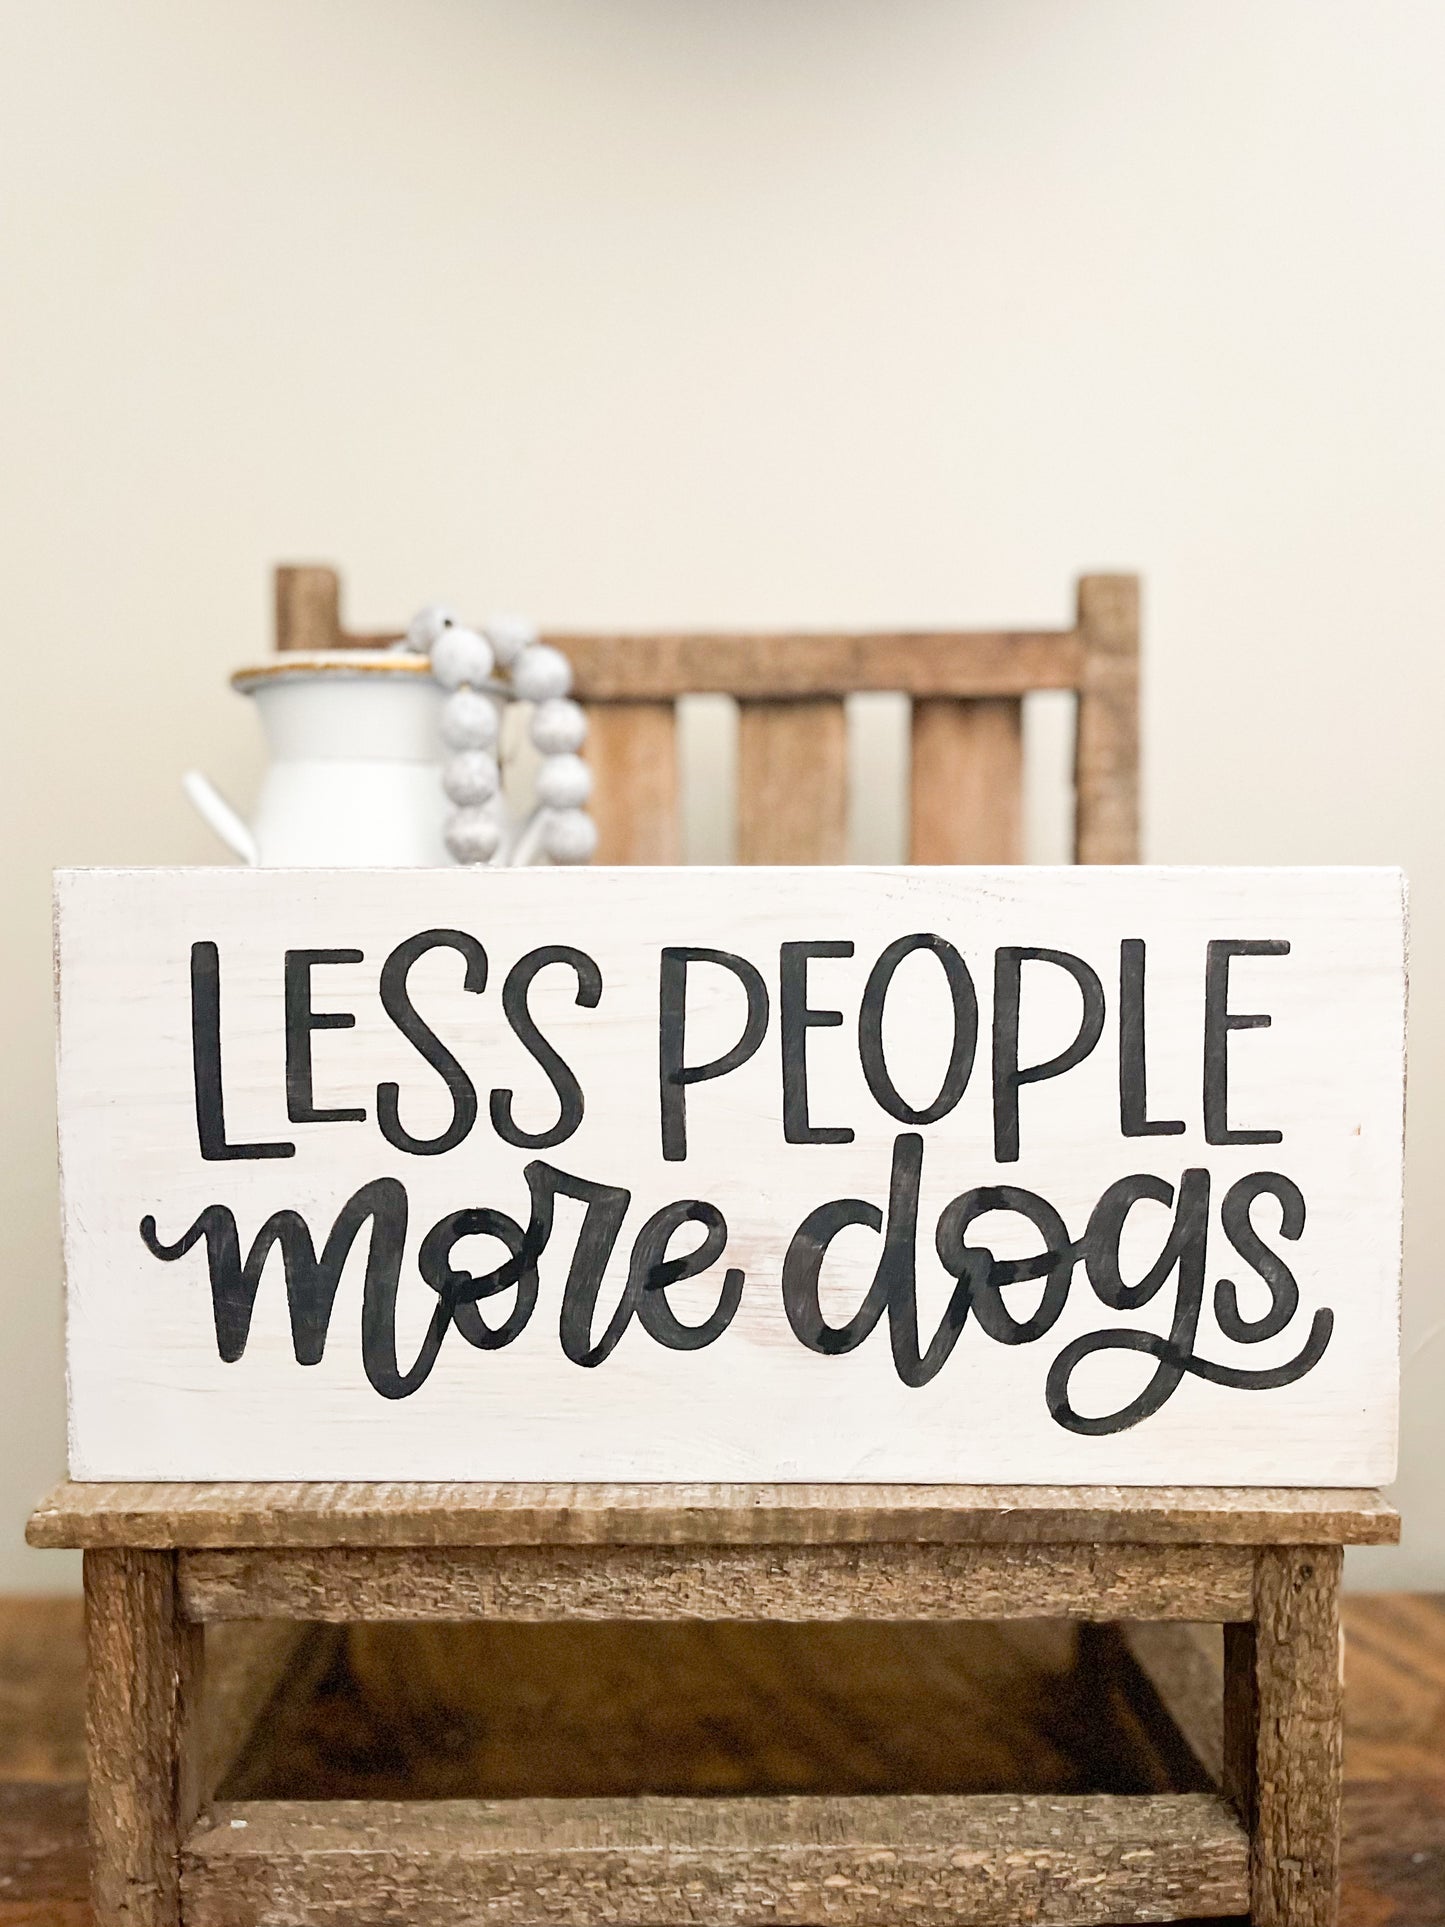 Less people more dogs sign